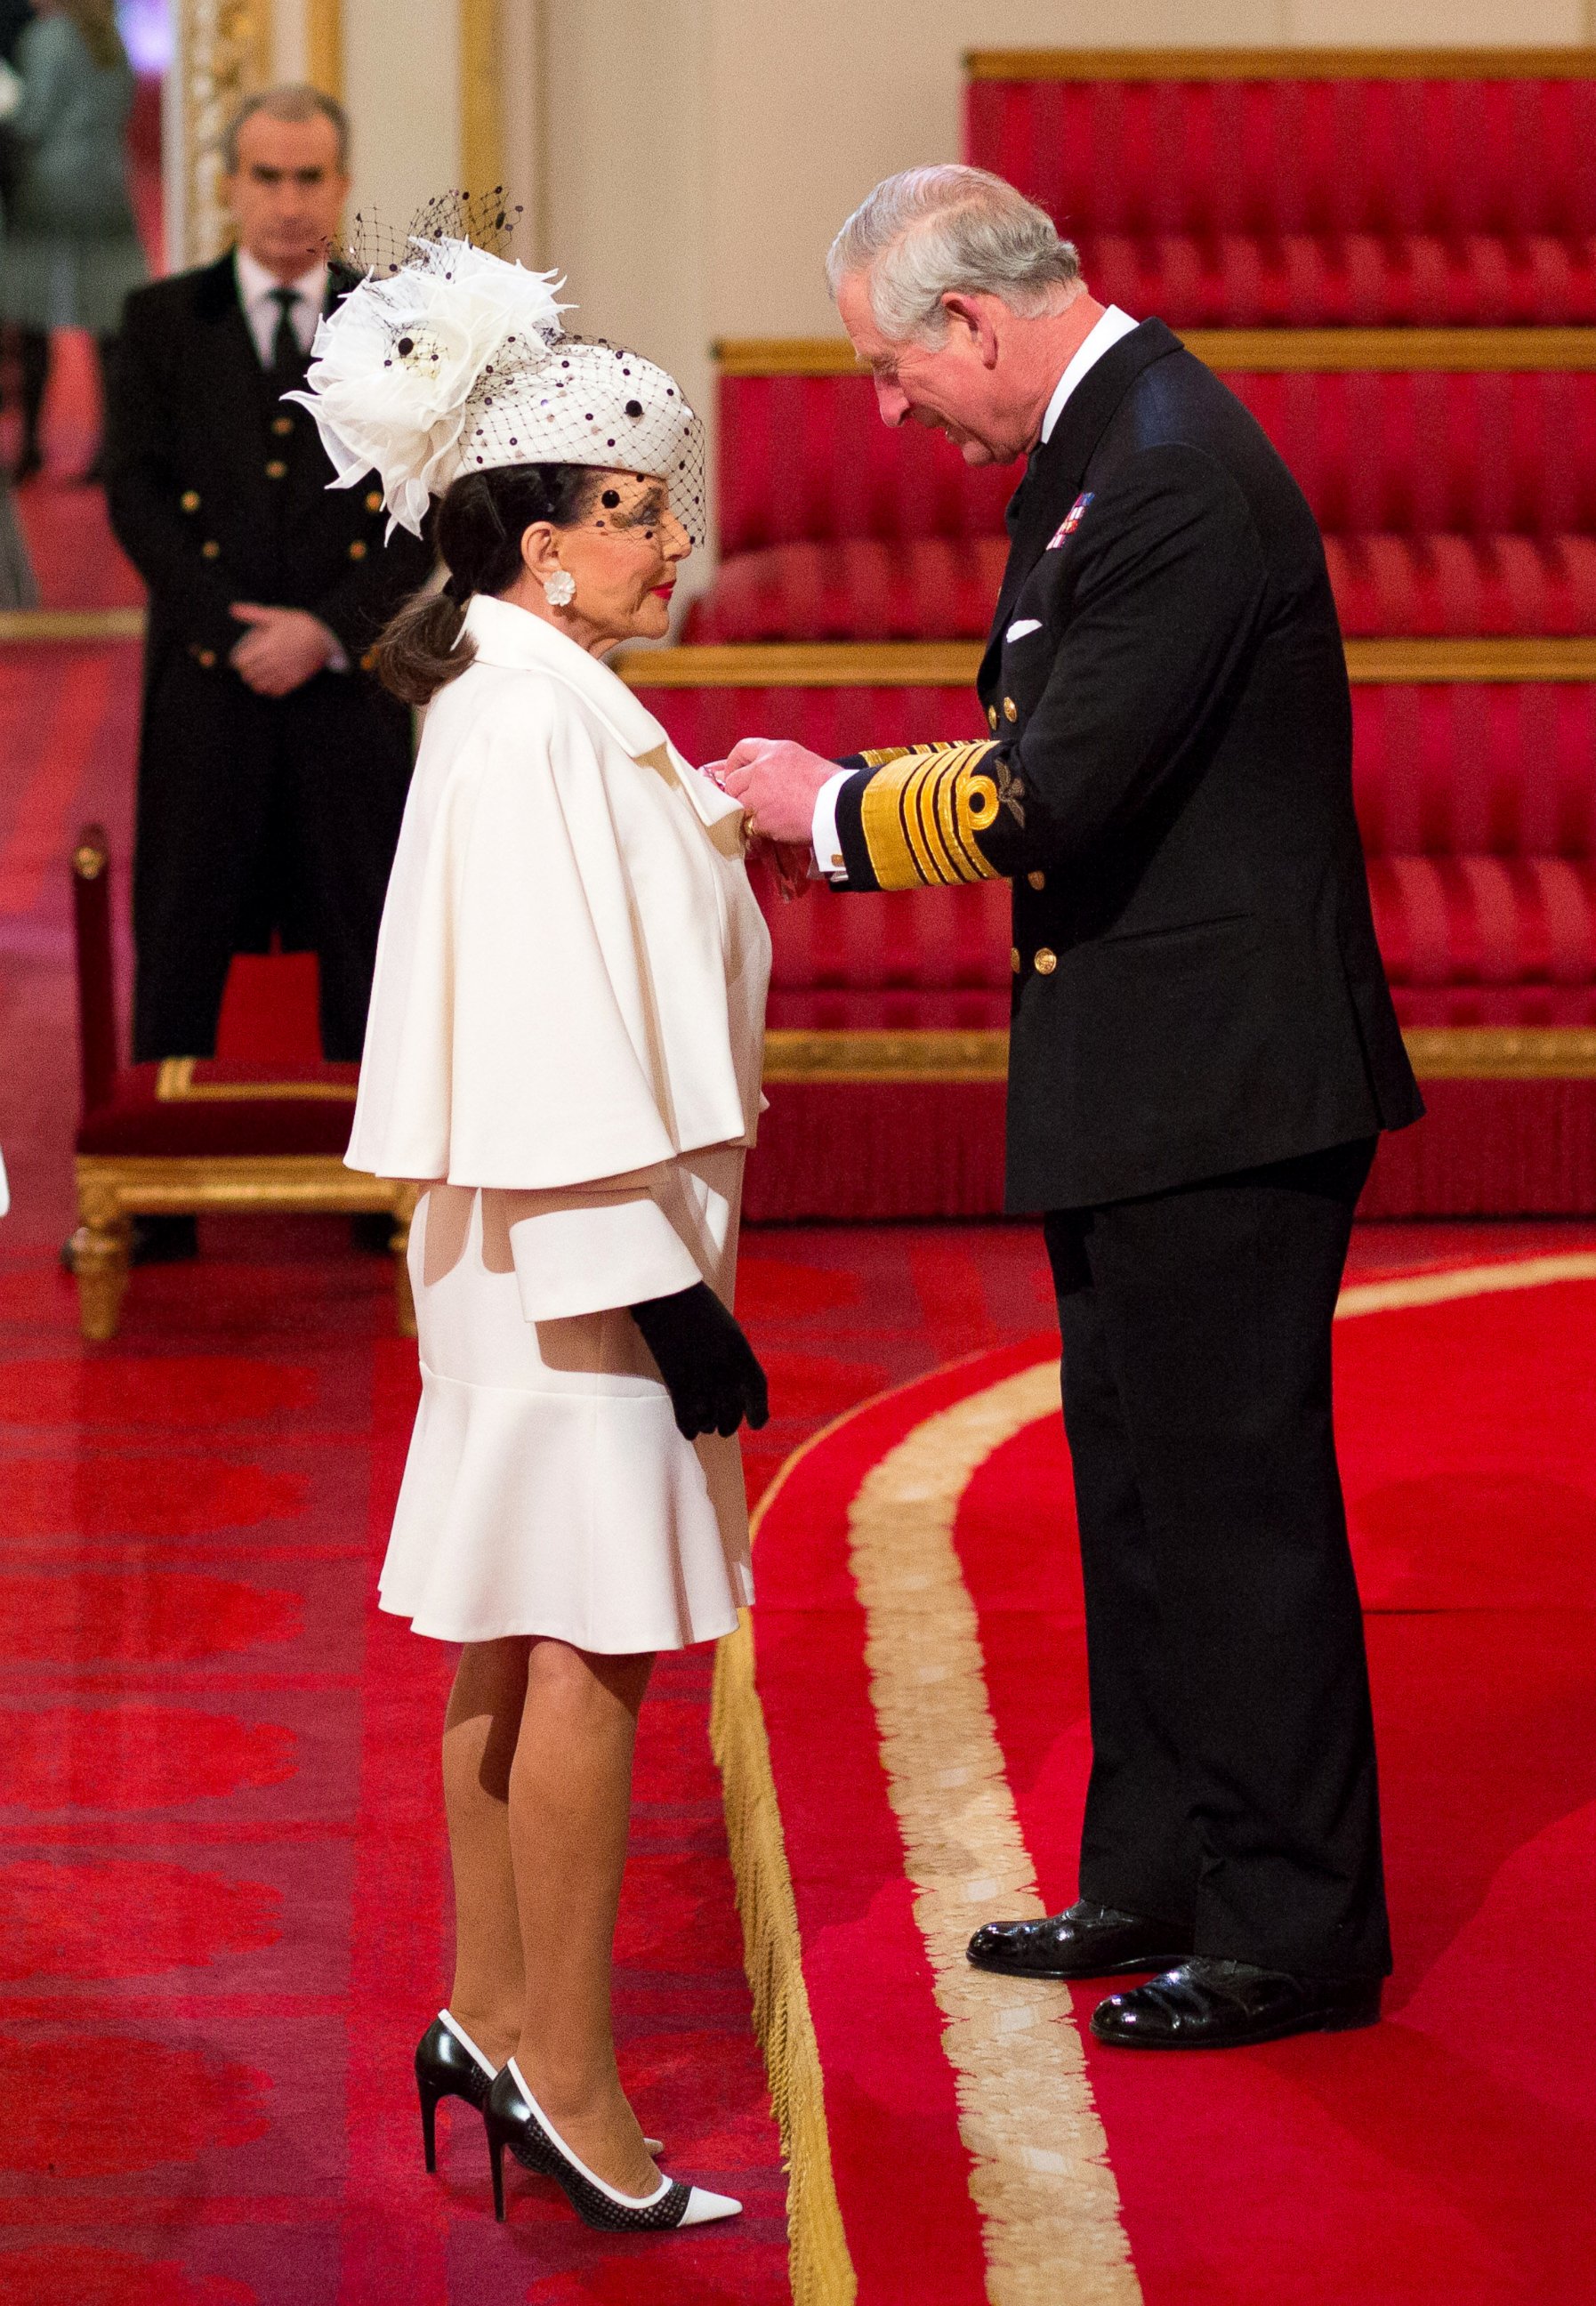 PHOTO: Joan Collins is made a Dame Commander of the British Empire by the Britain's Prince Charles, Prince of Wales, during an Investiture ceremony at Buckingham Palace in London, March 26, 2015.